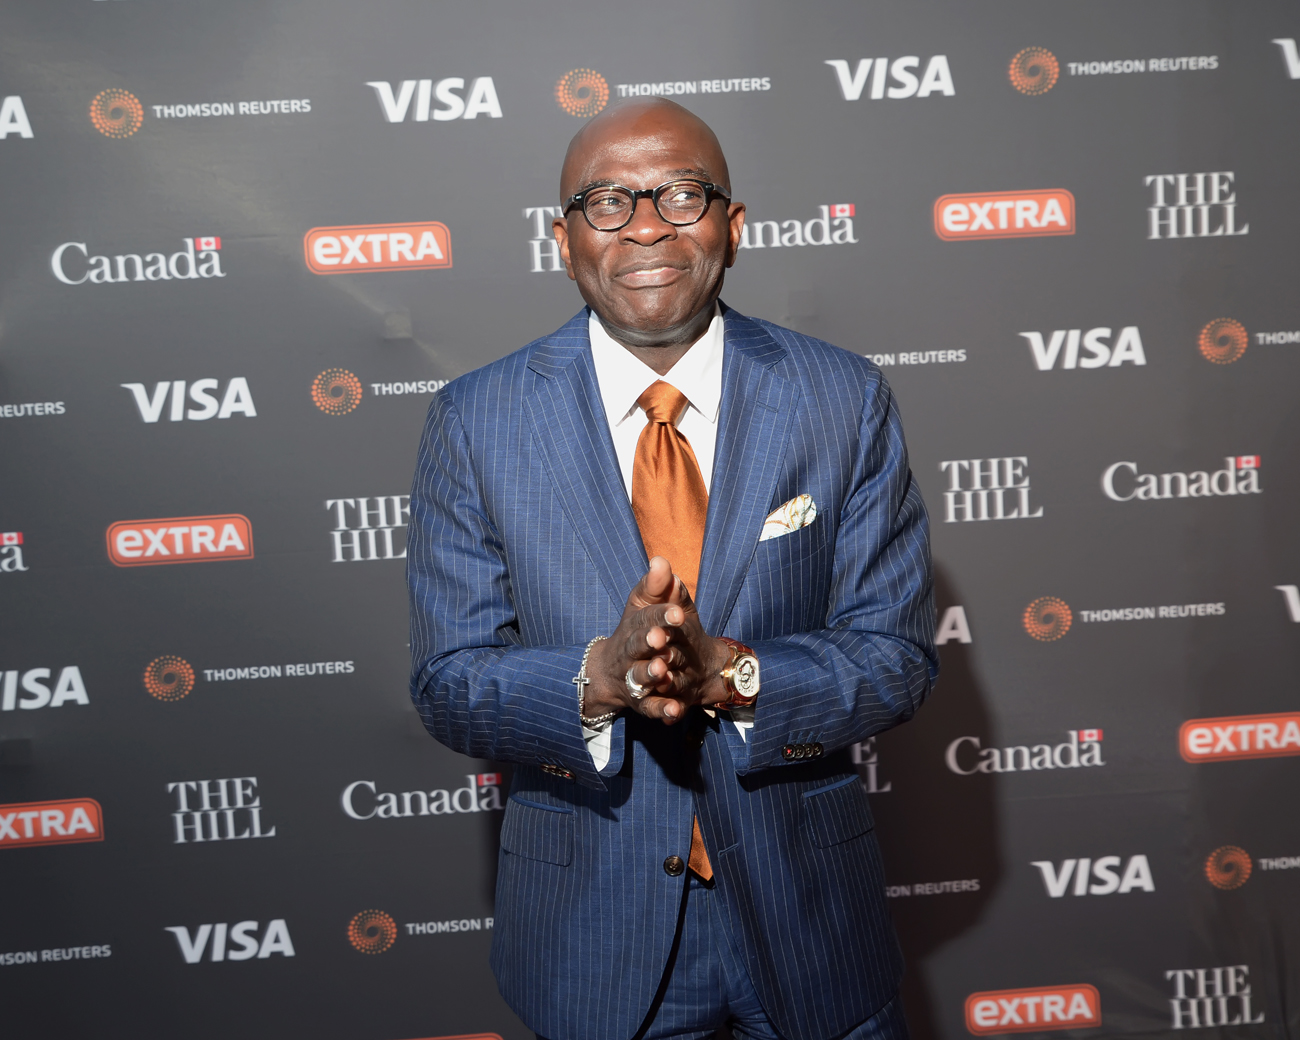 TV and radio host Armstrong Williams attends The Hill/Extra/Embassy of Canada WHCD pre-party in Washington D.C. on Friday April 29. (Shannon Finney Photography)